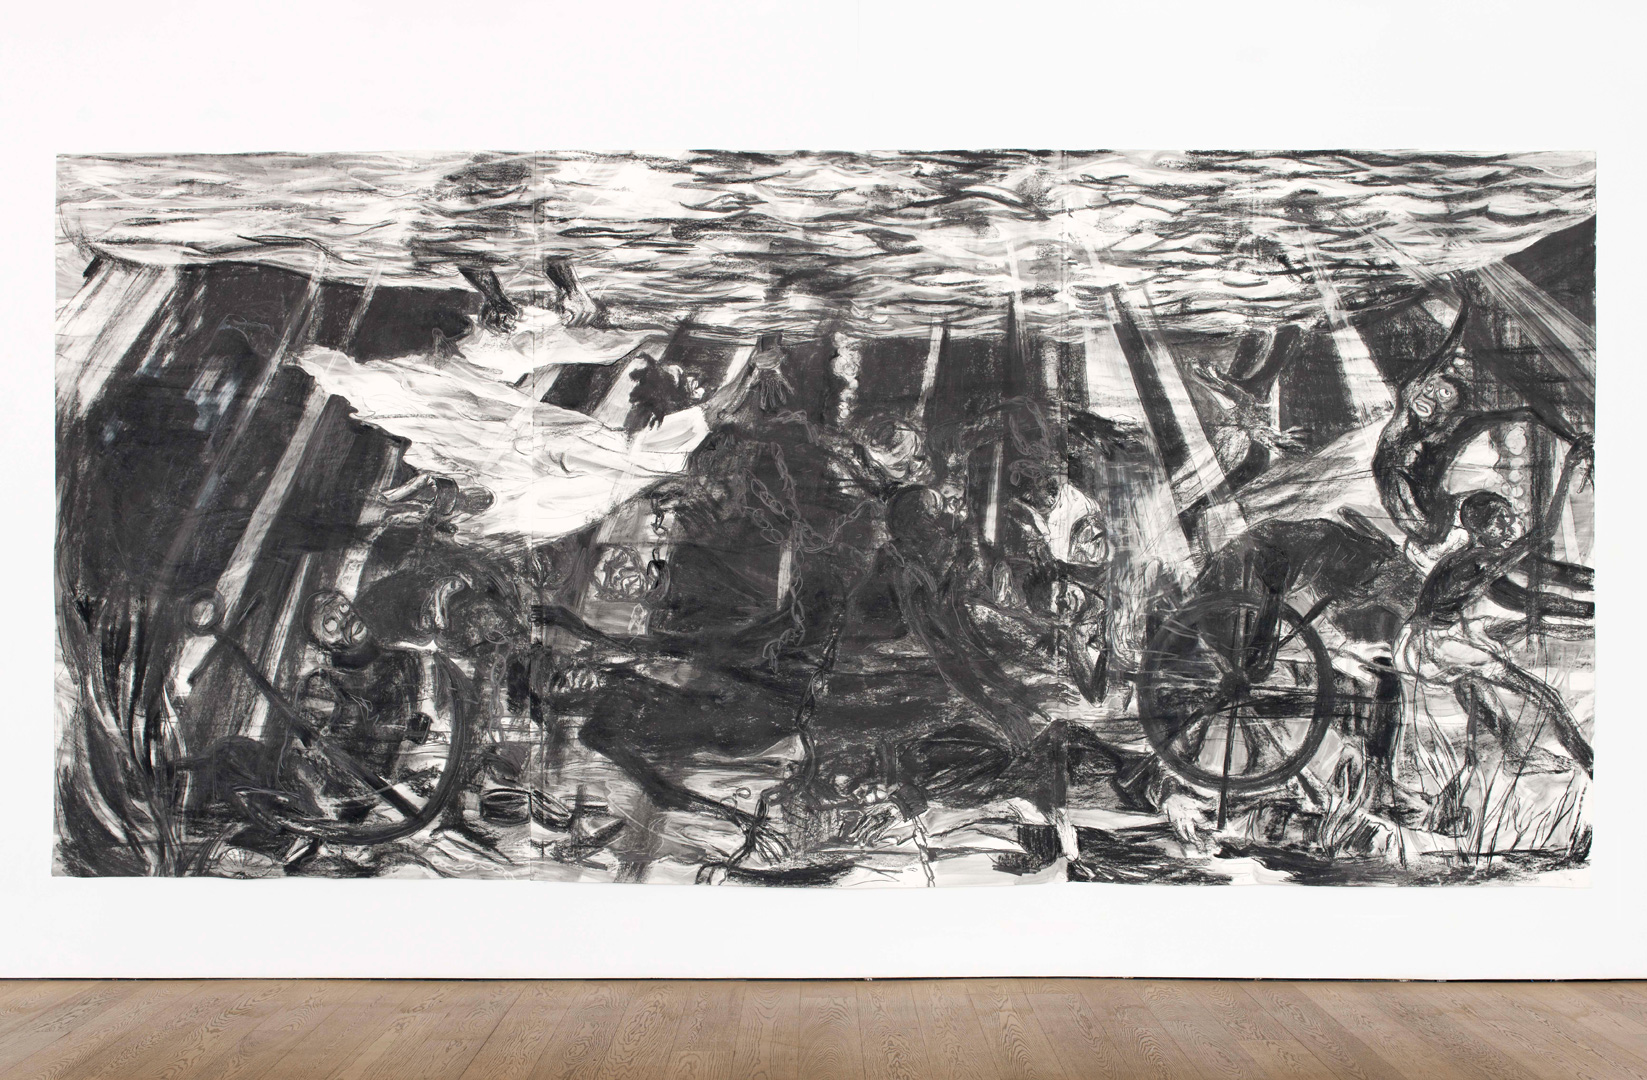 Kara Walker - The Palmetto Libretto (part two of a multi part work. This one's a sketch for an American comic opera with shipwreck and cargo), 2012, pastel and graphite on paper